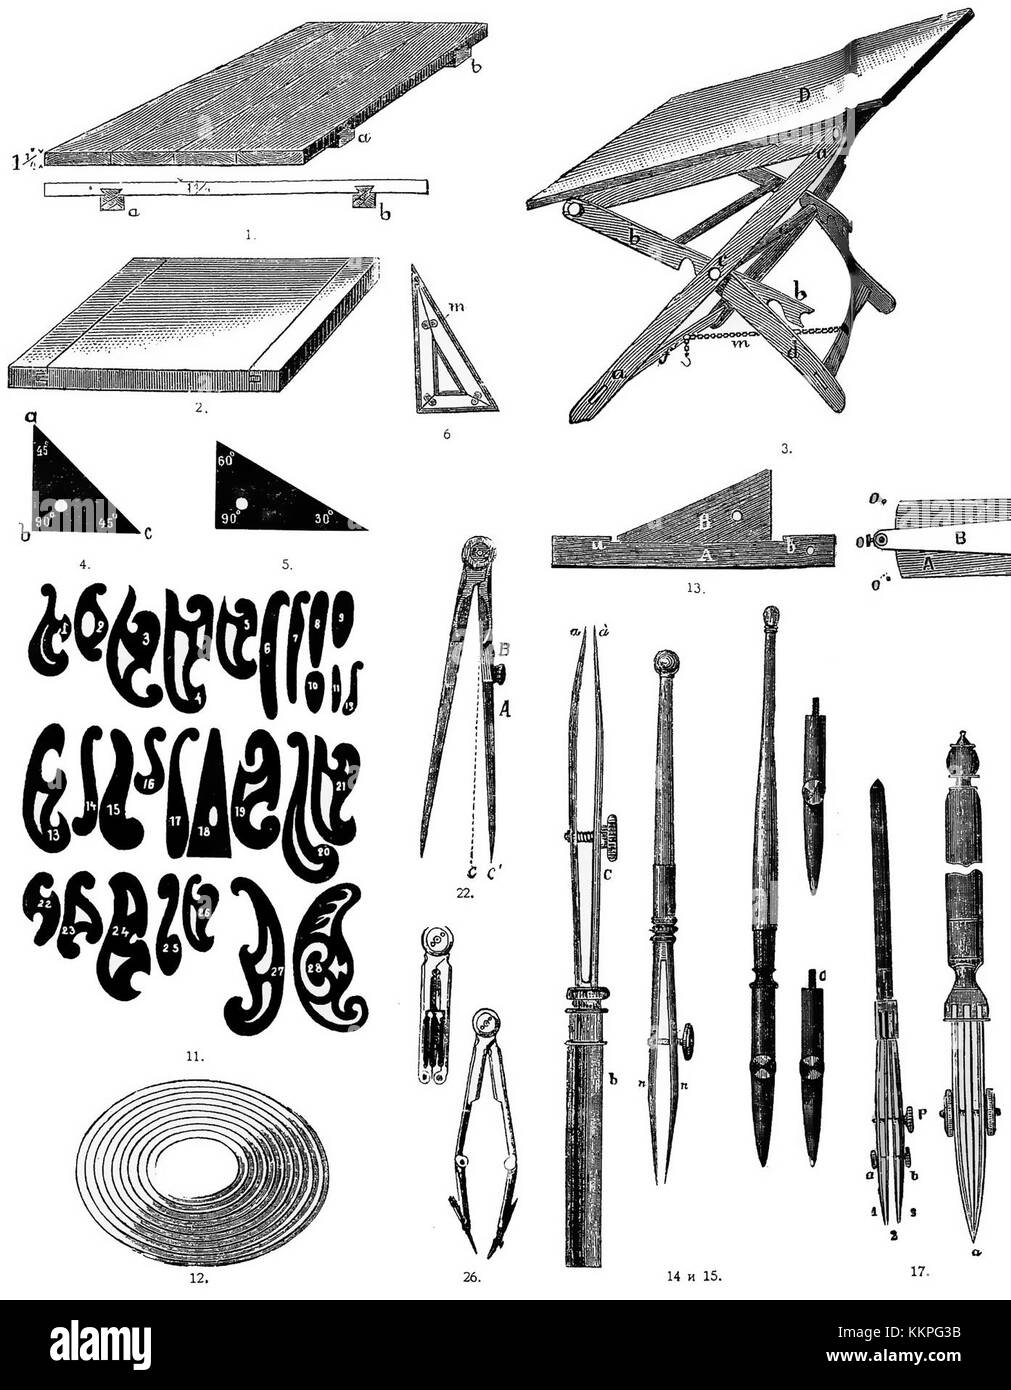 Technical drawing instruments 1 Stock Photo